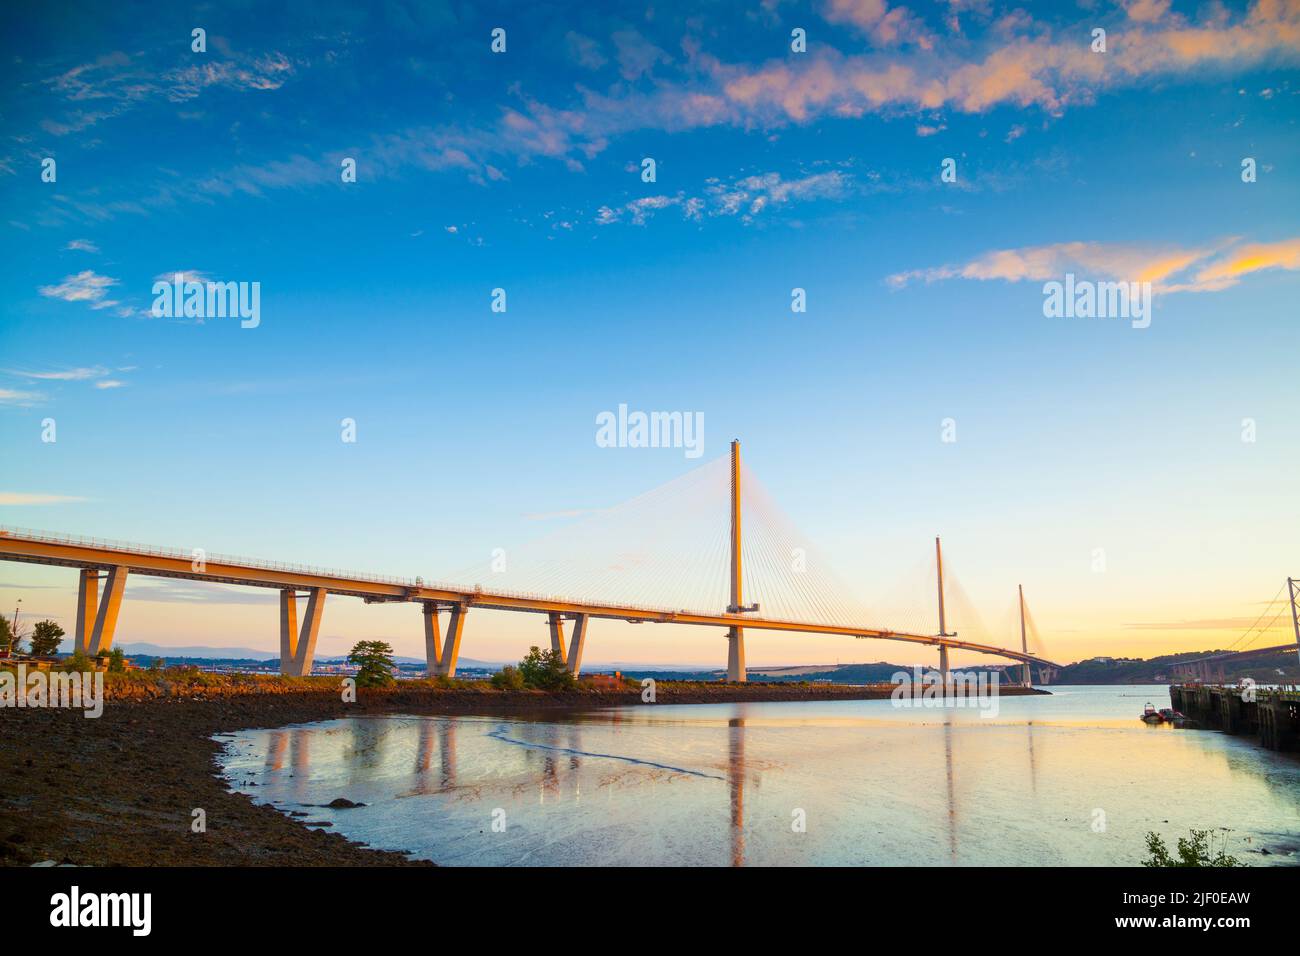 The Queensferry Crossing the new bridge over the Firth of Forth turning golden at sunrise, Edinburgh Scotland. Stock Photo